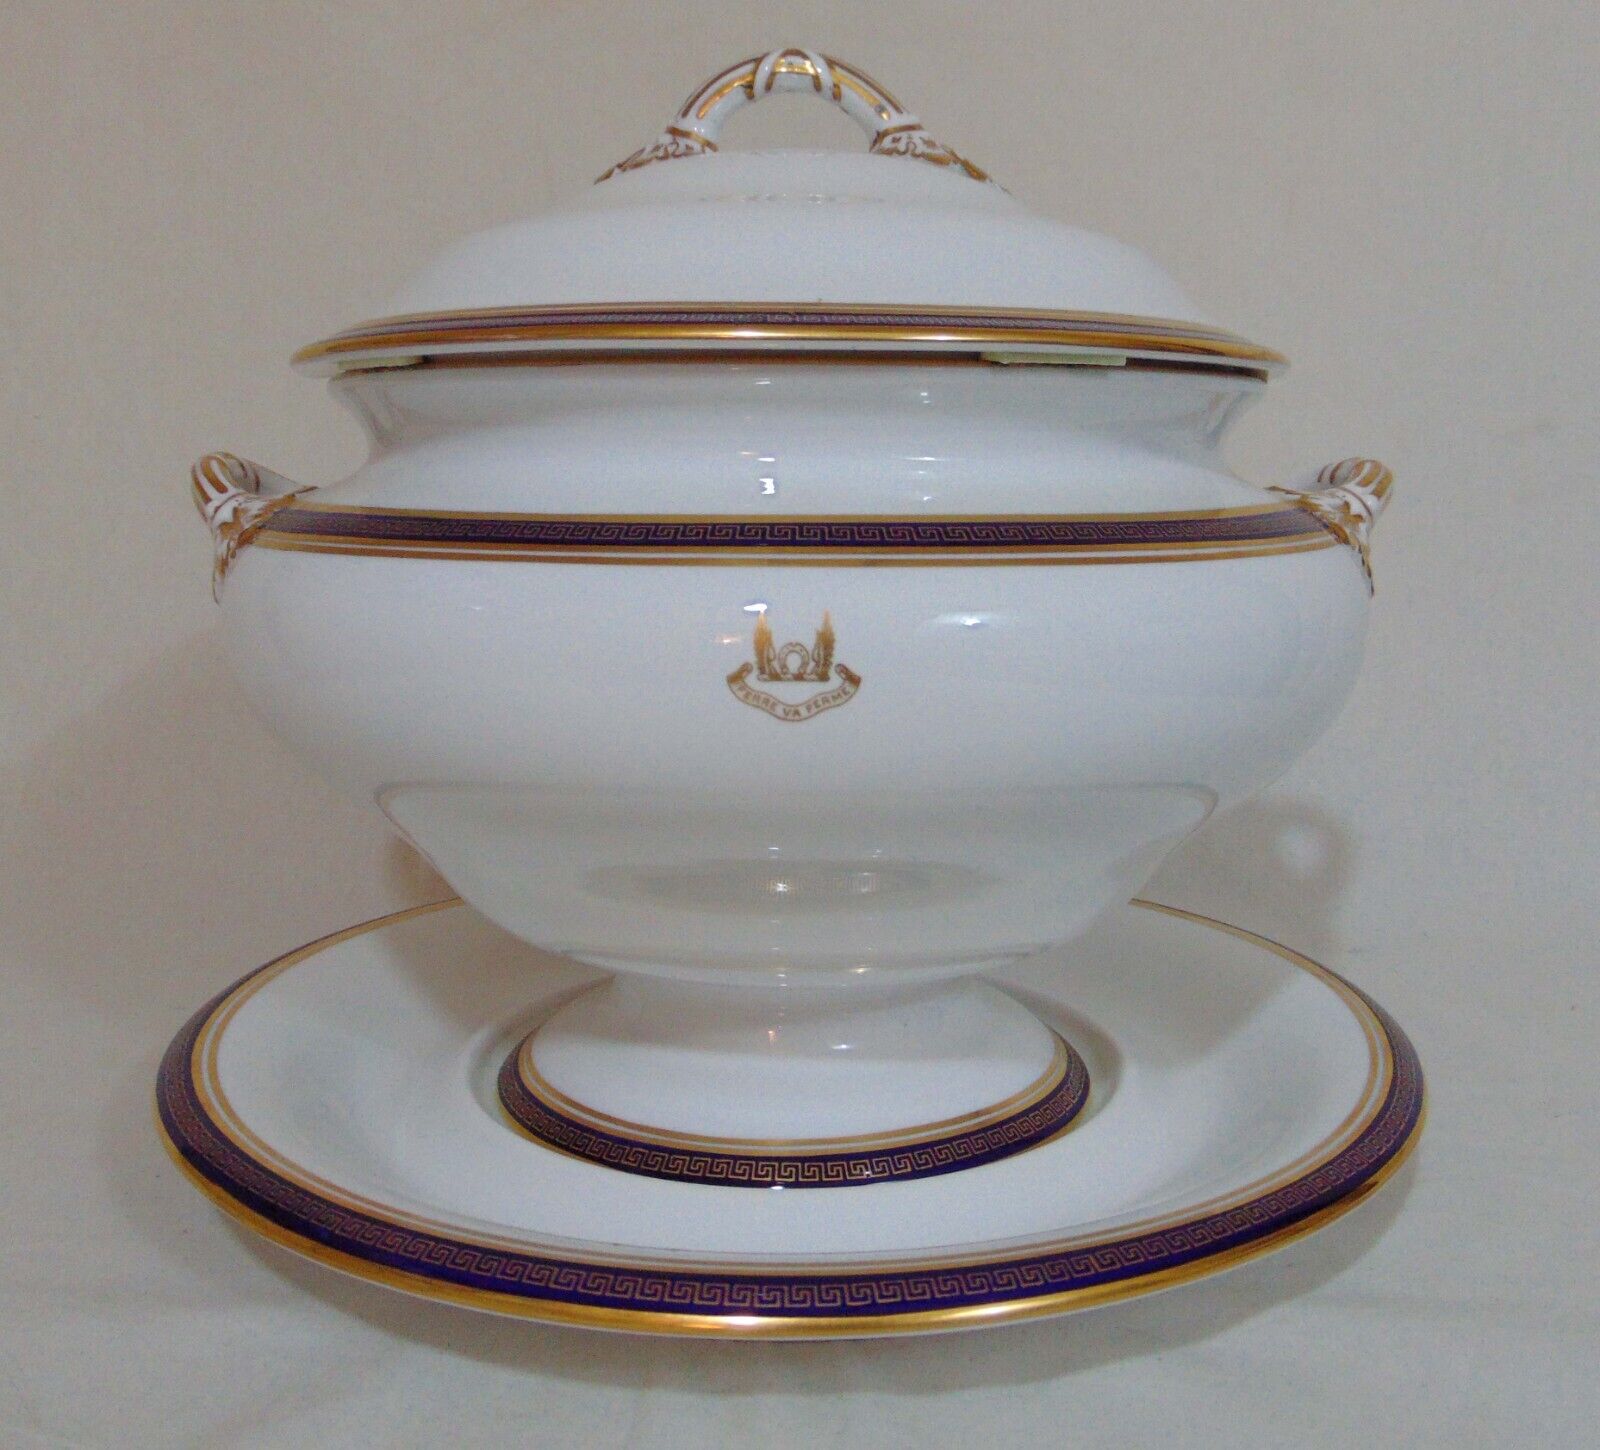 2pc Copeland Spode Soup Tureen Bowl Cobalt Gold Covered Bowl Underplate 